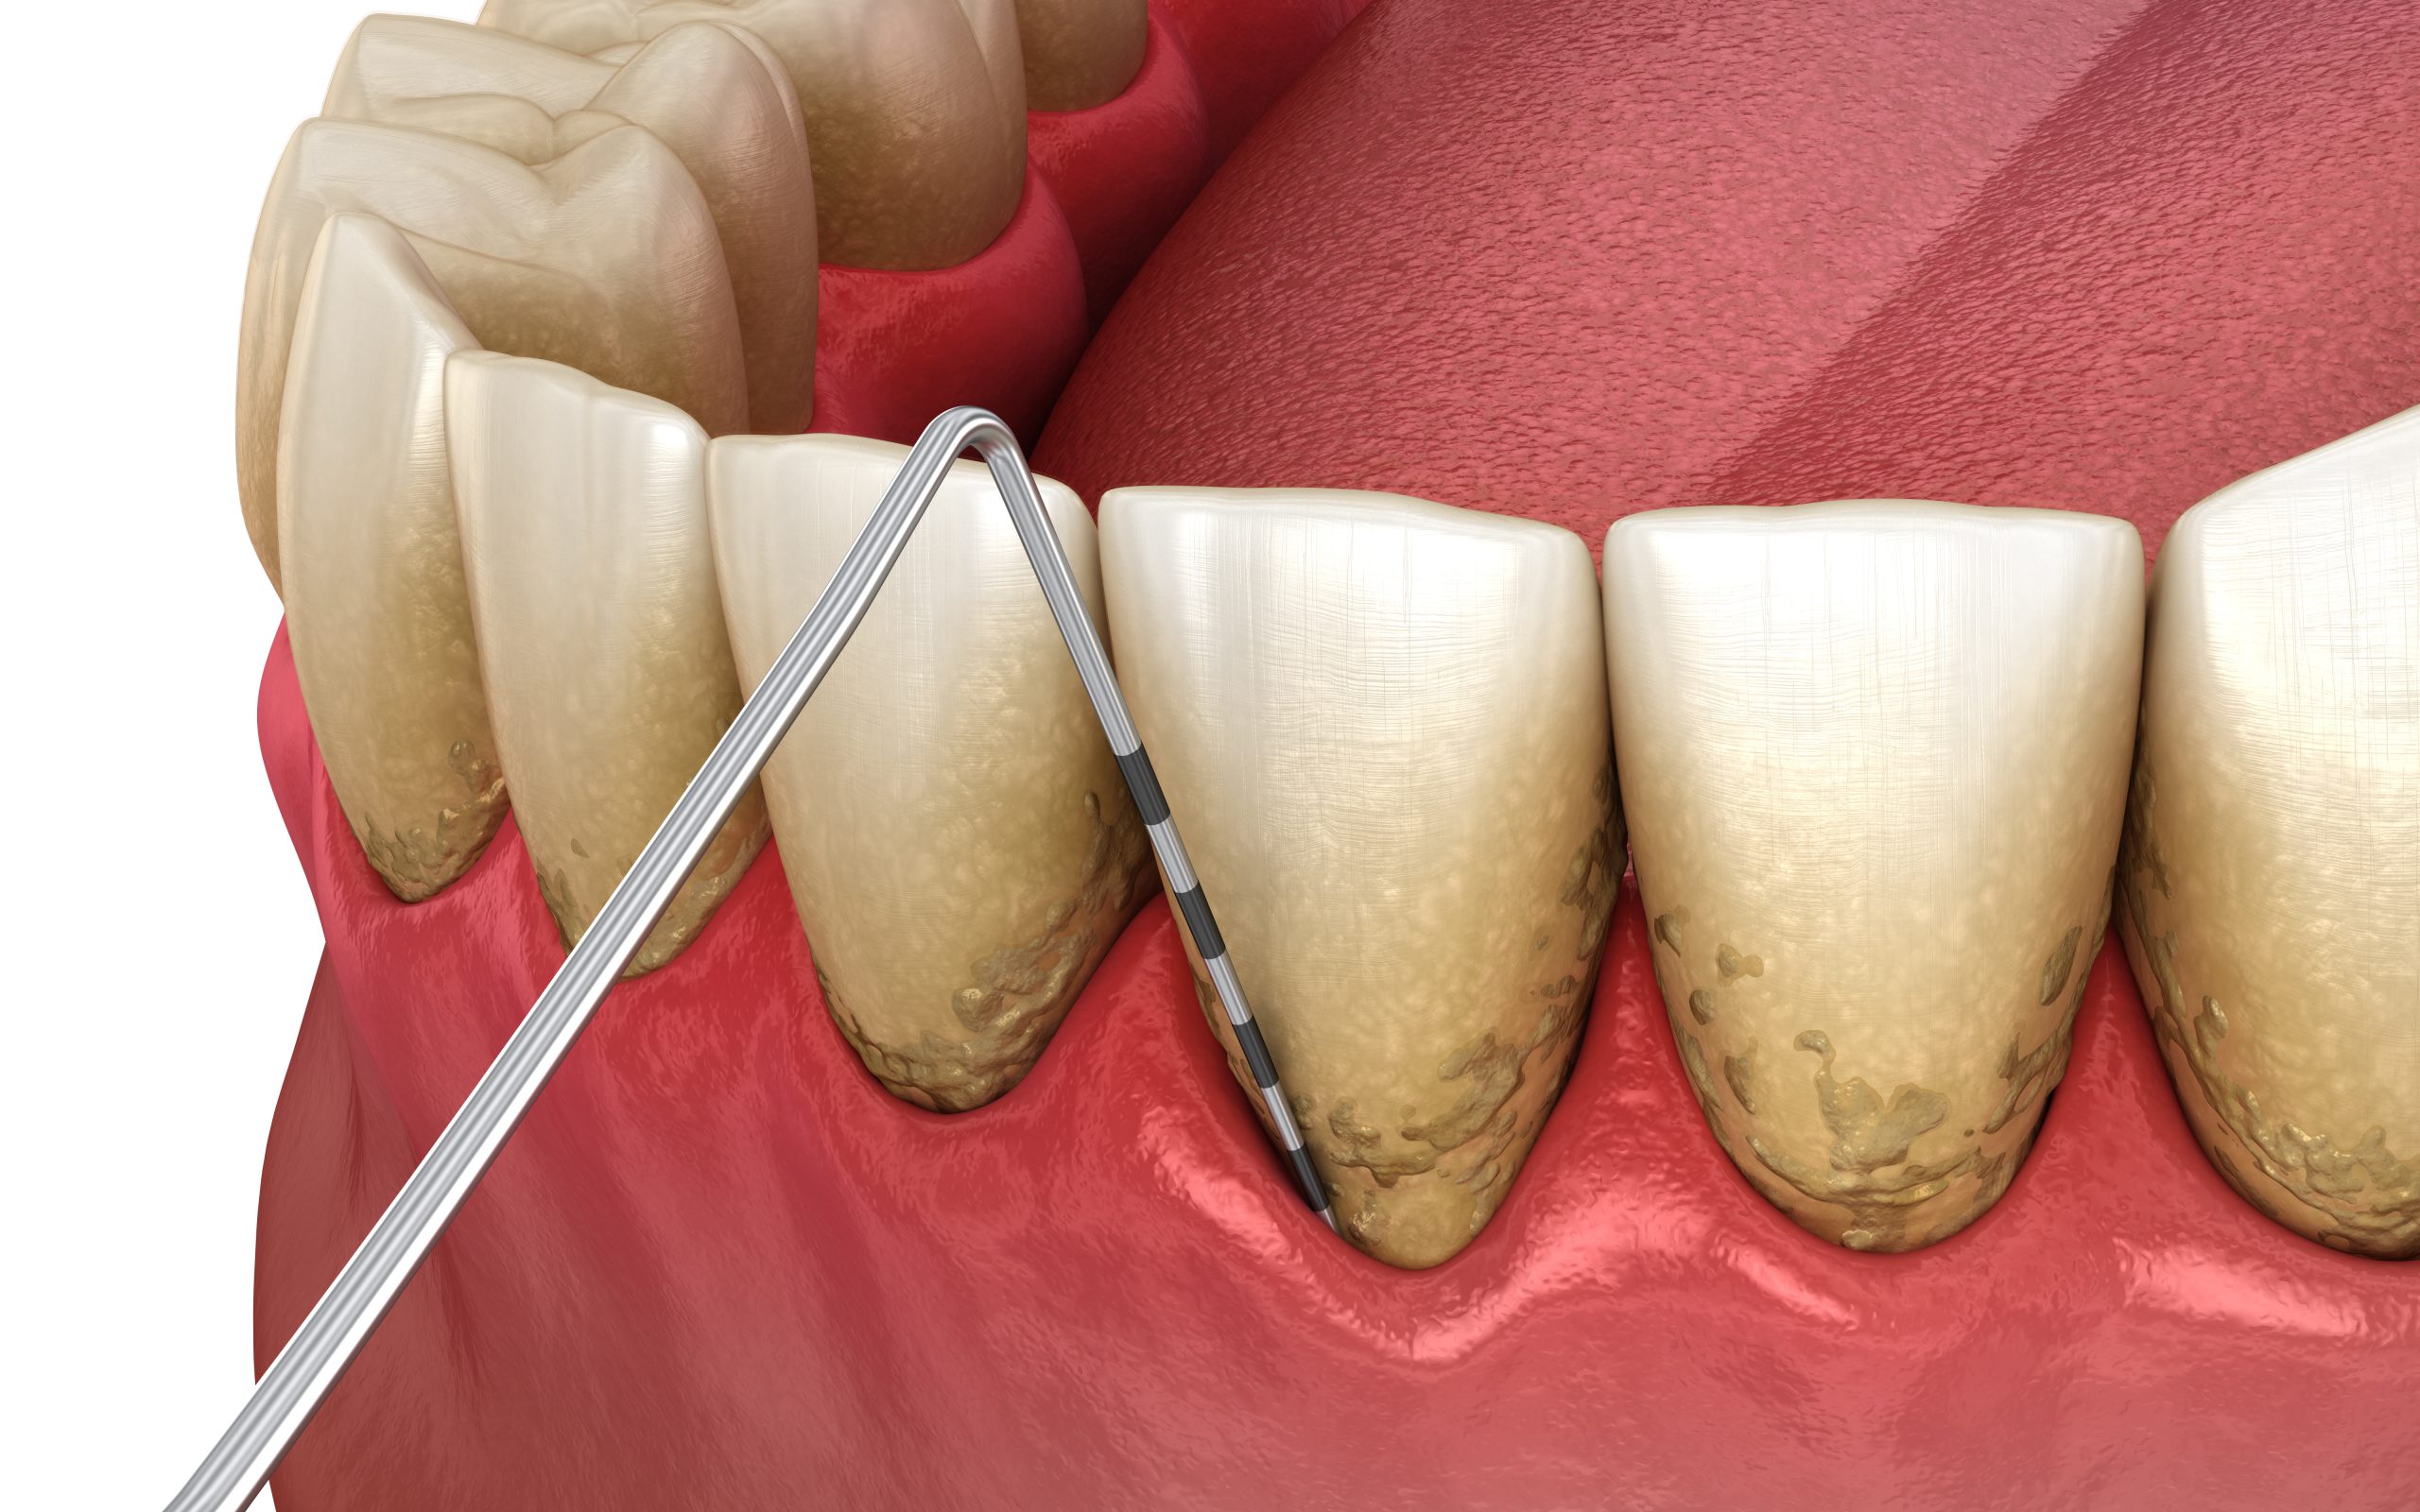 Periodontitis testing, gum recession process. Medically accurate 3D illustration